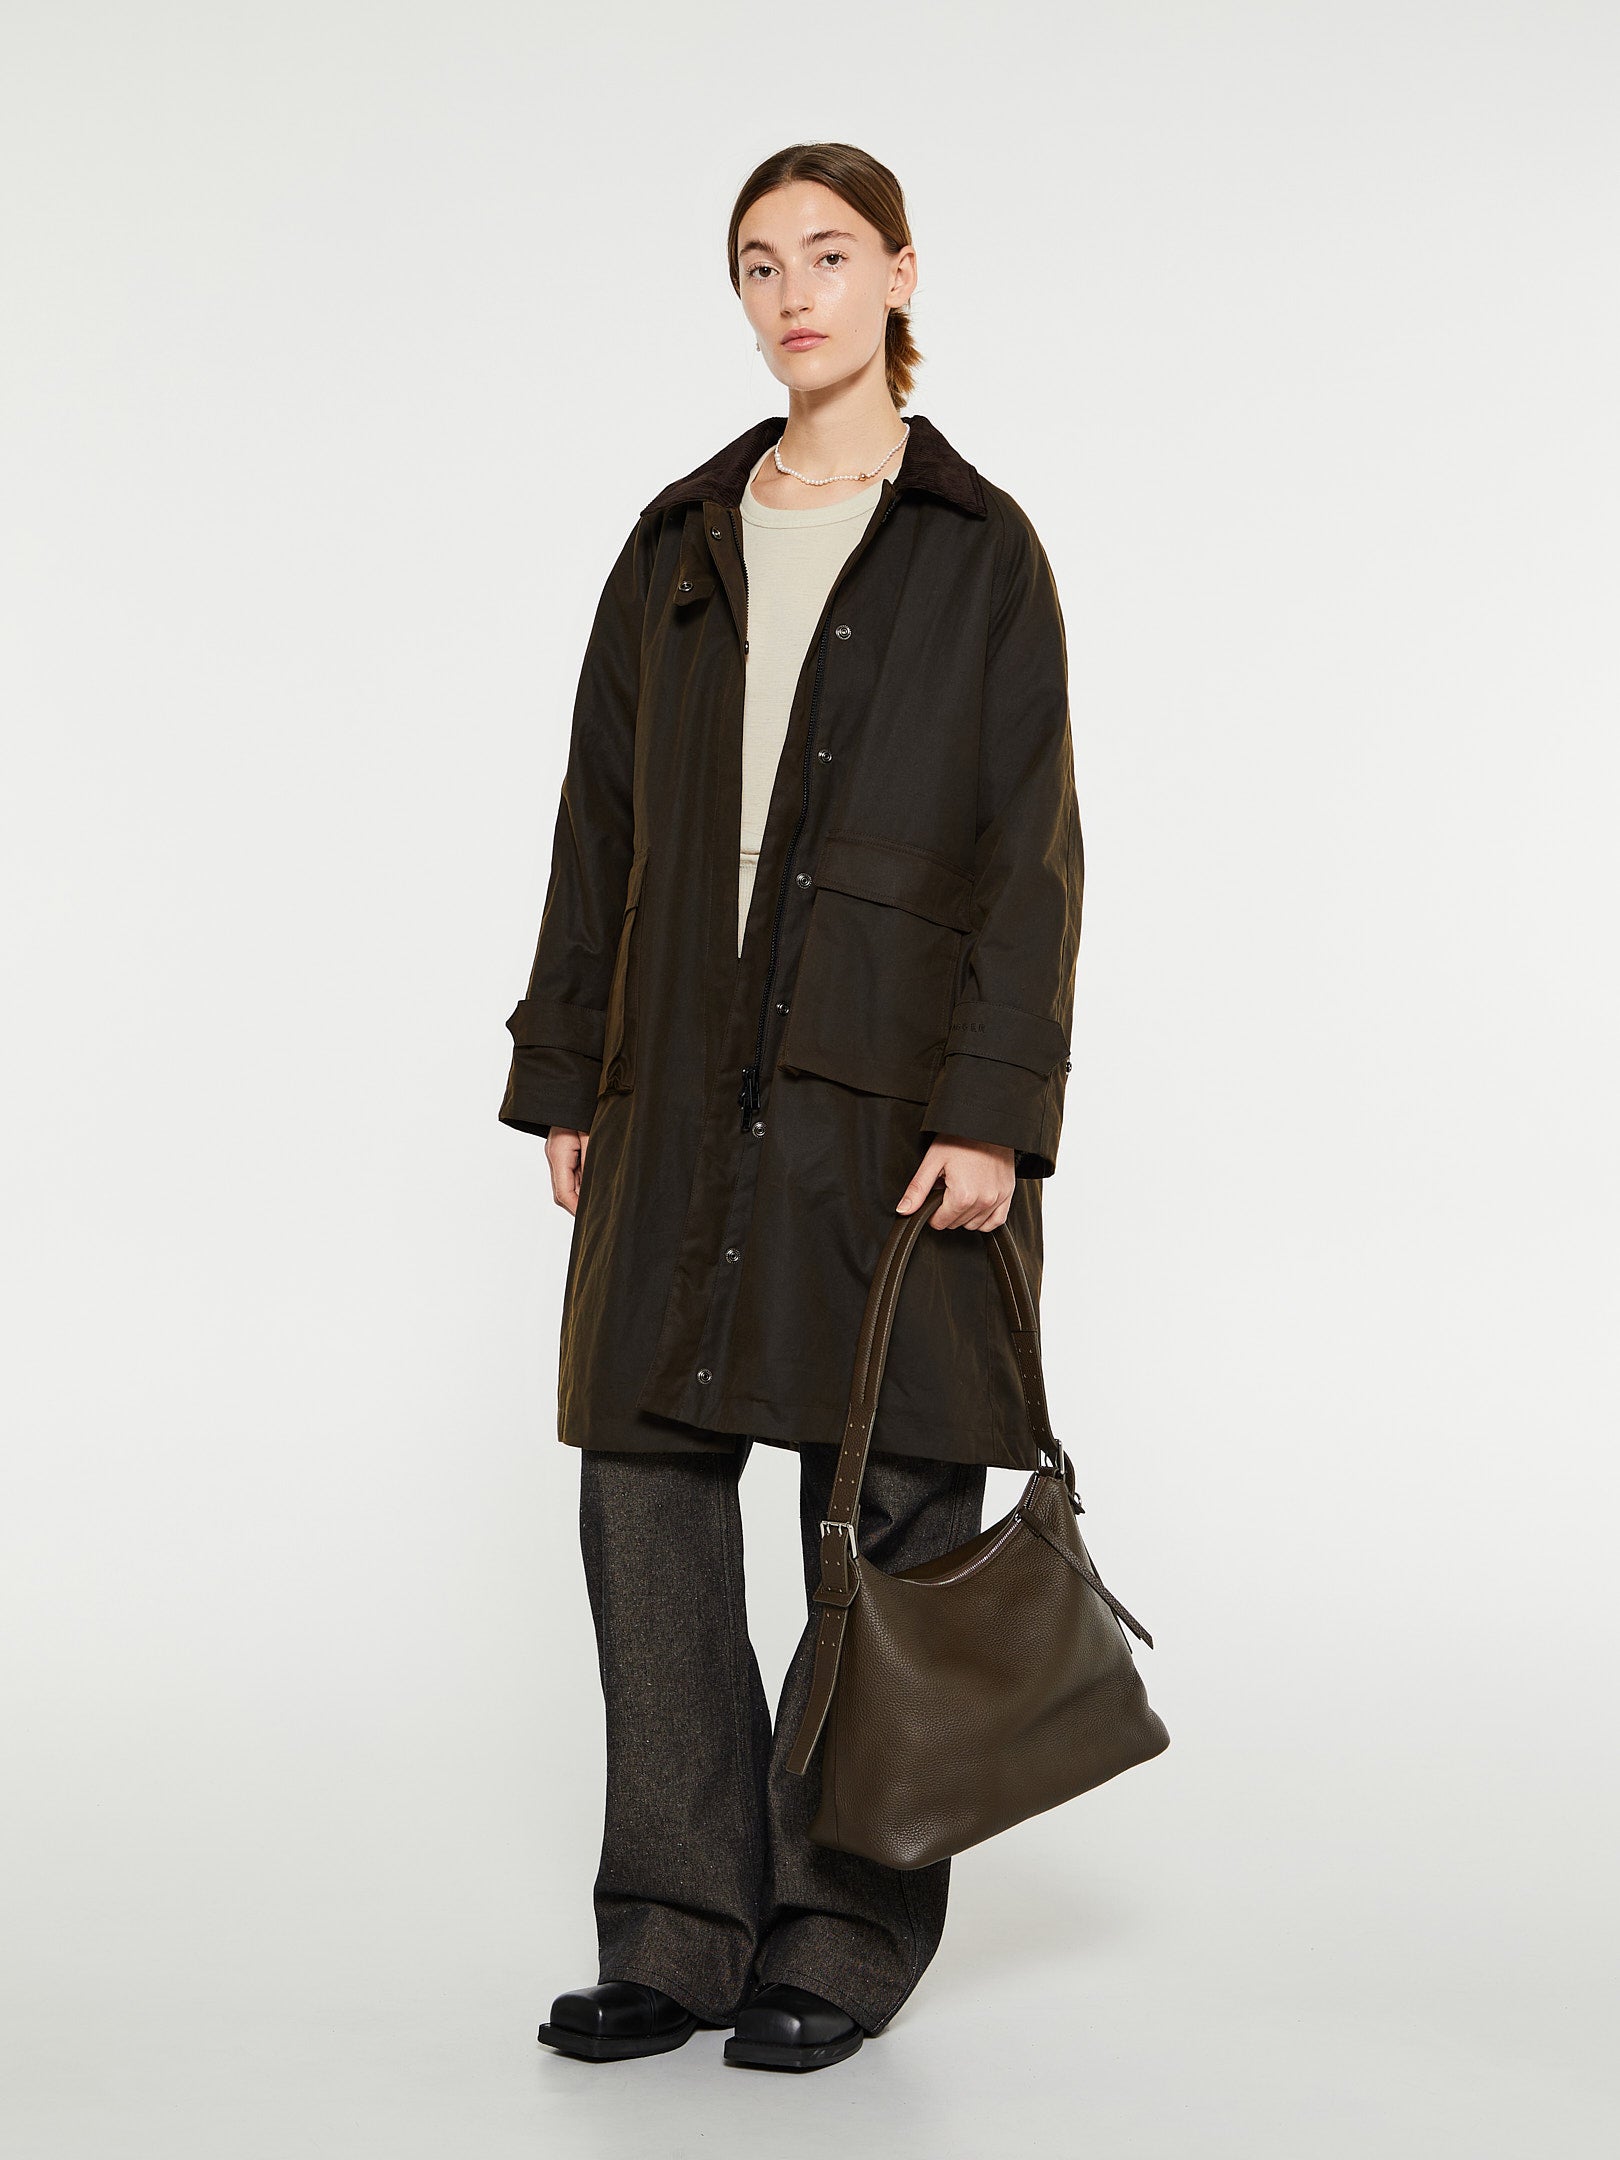 Coats & the Shop at women stoy | selection for Jackets